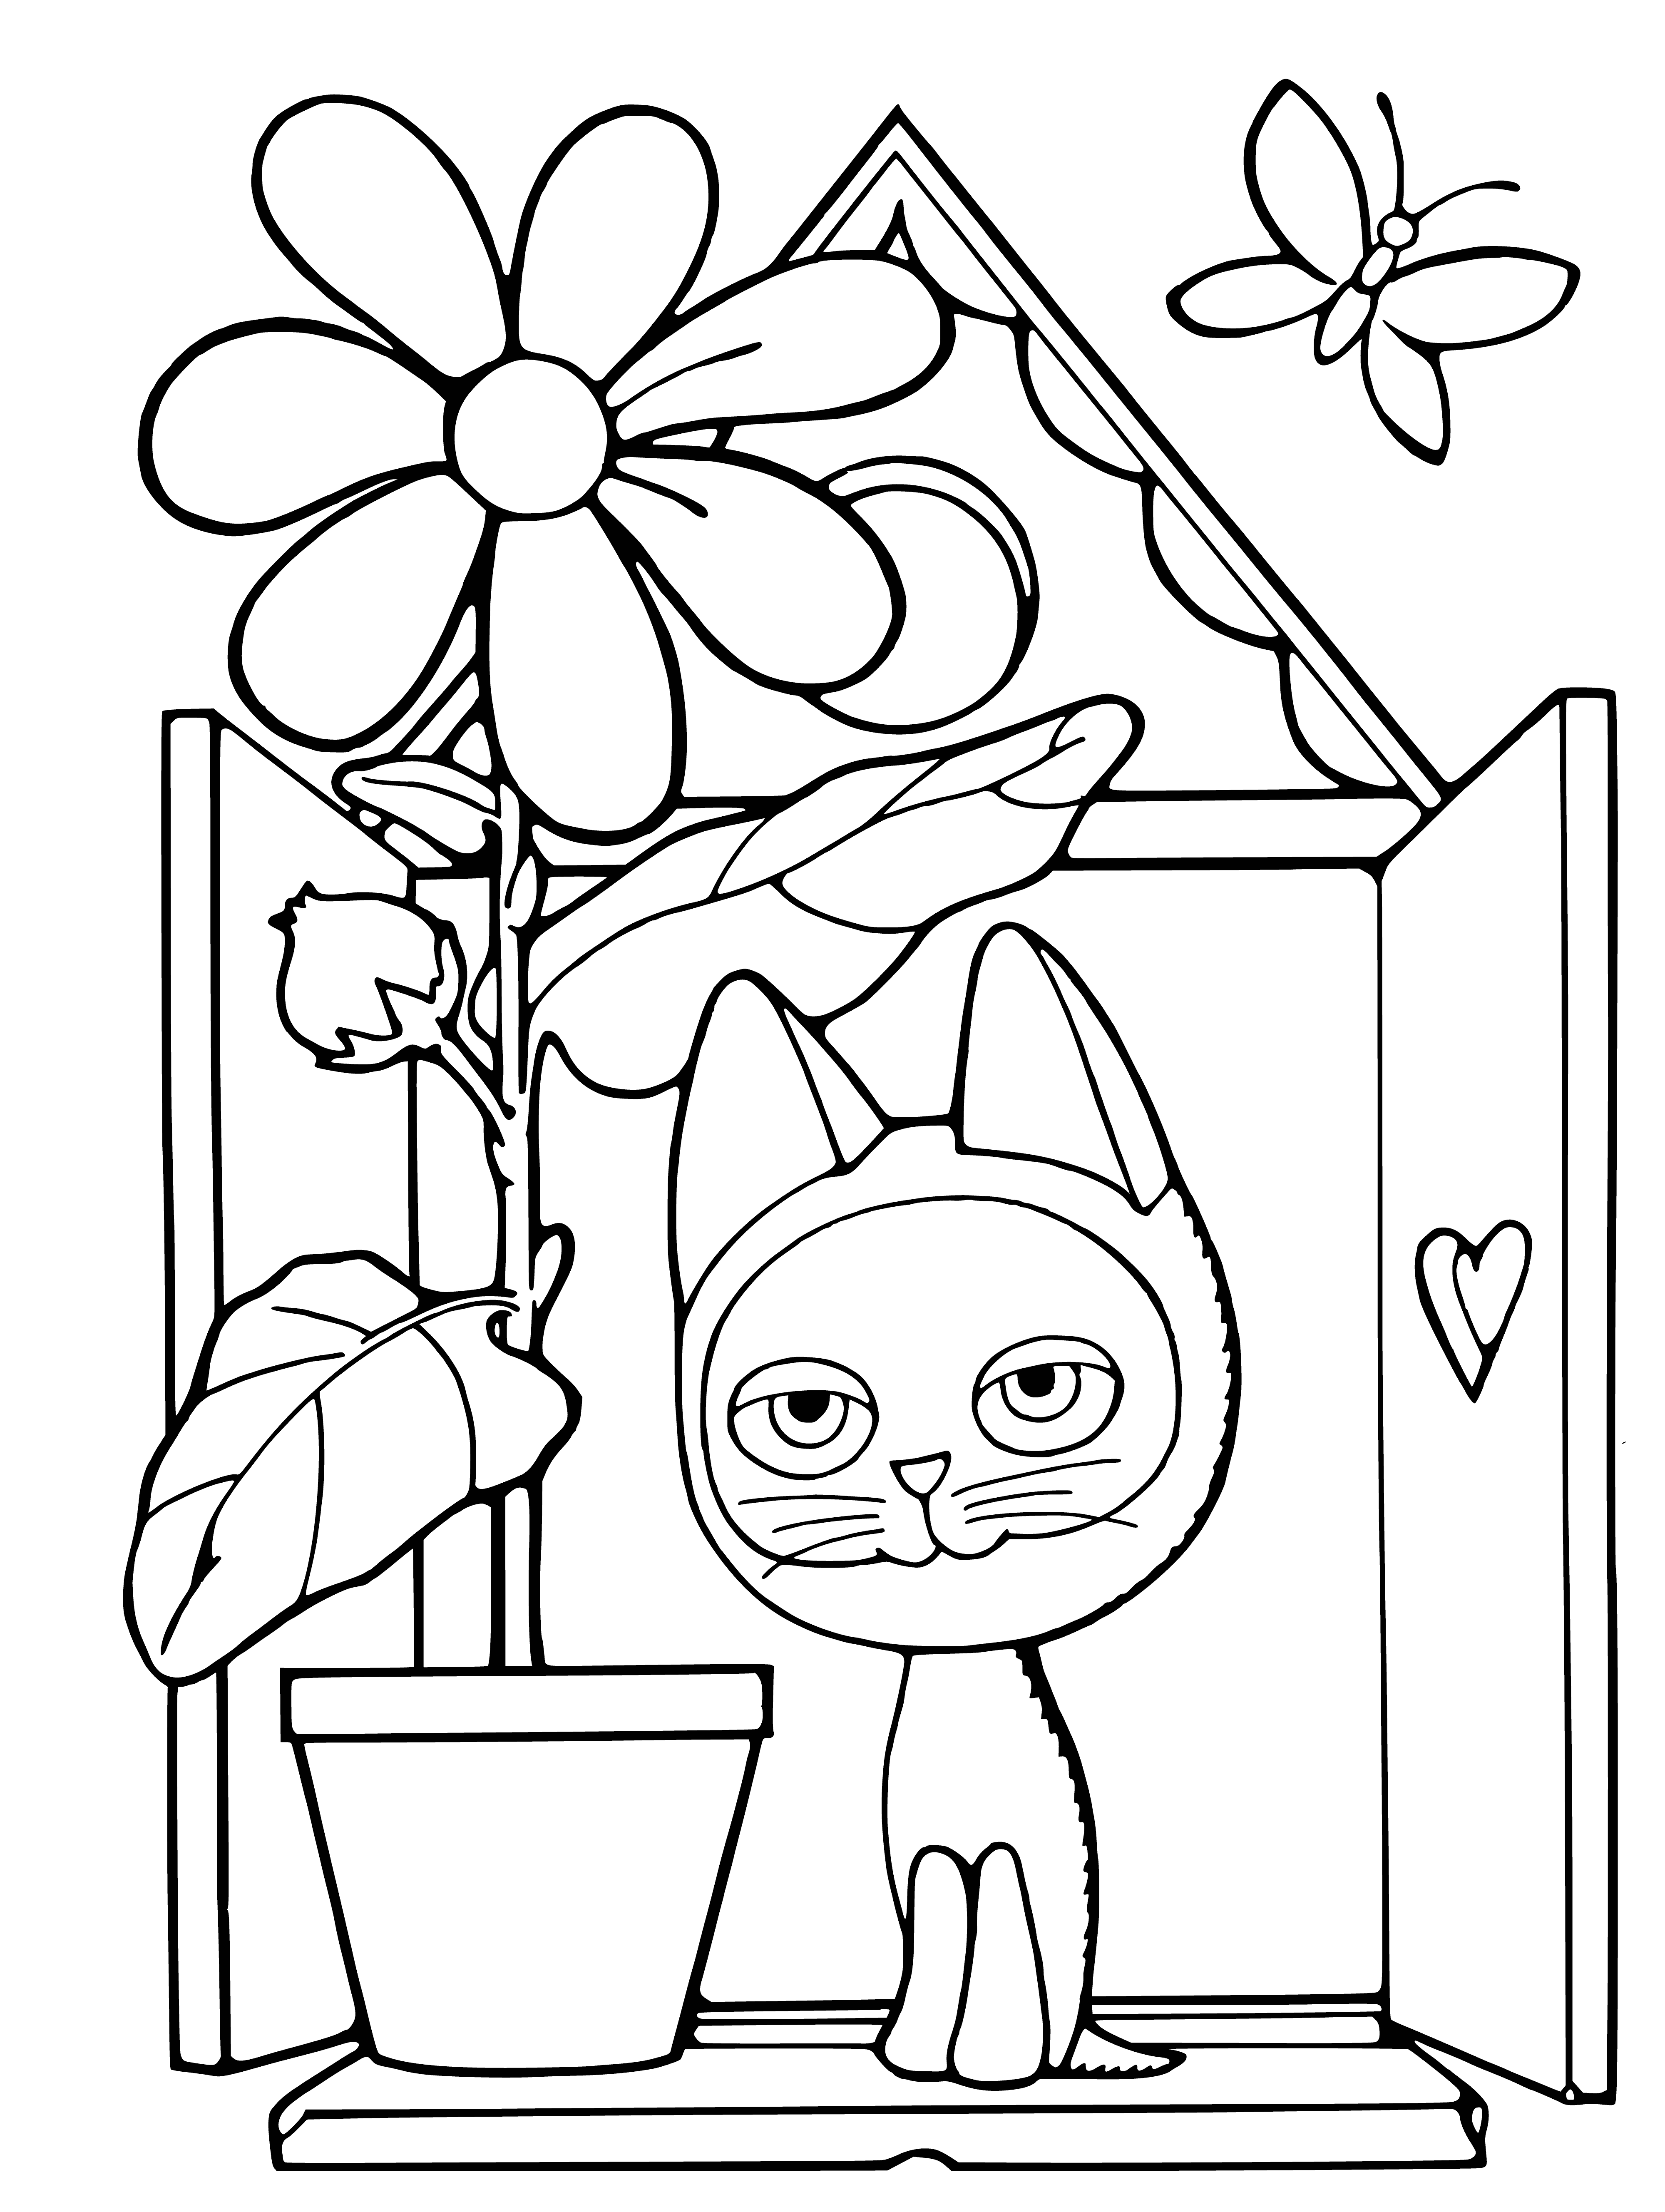 coloring page: Small white fluffy kitten with big blue eyes and black nose, snuggled up on brown/white blanket.